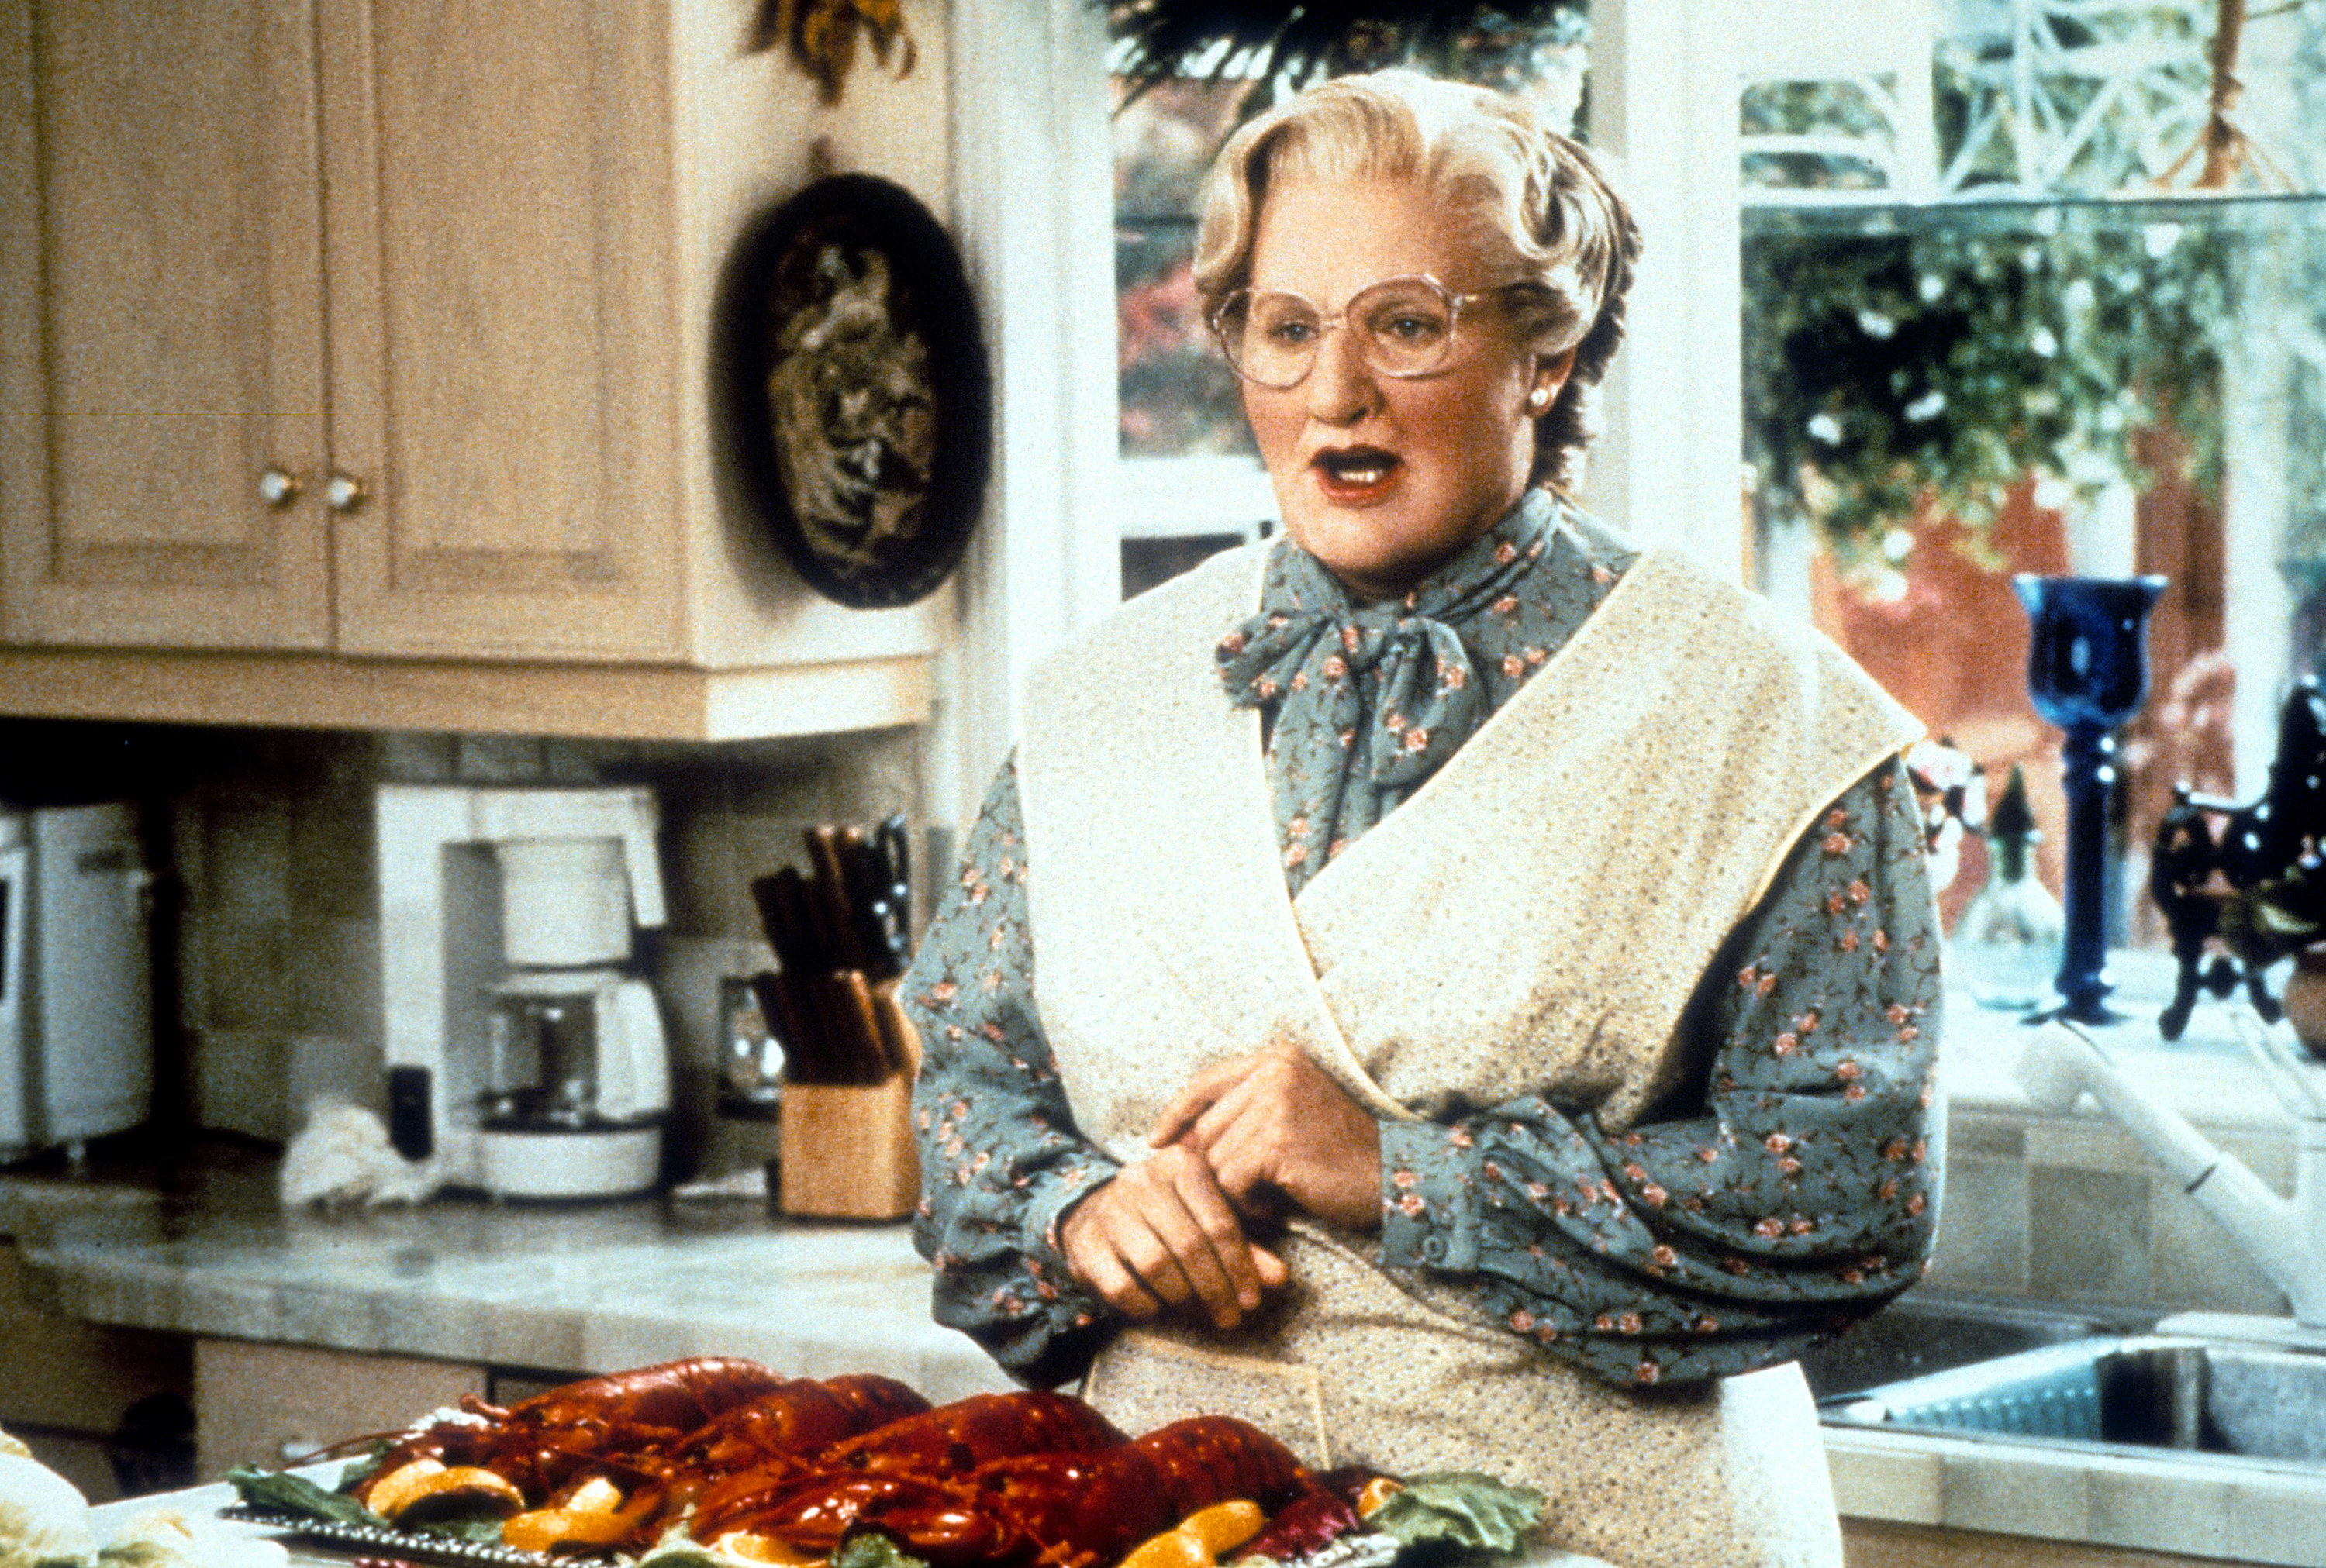 Robin Williams is stunned with his mouth open while performing as Mrs. Doubtfire in a kitchen scene